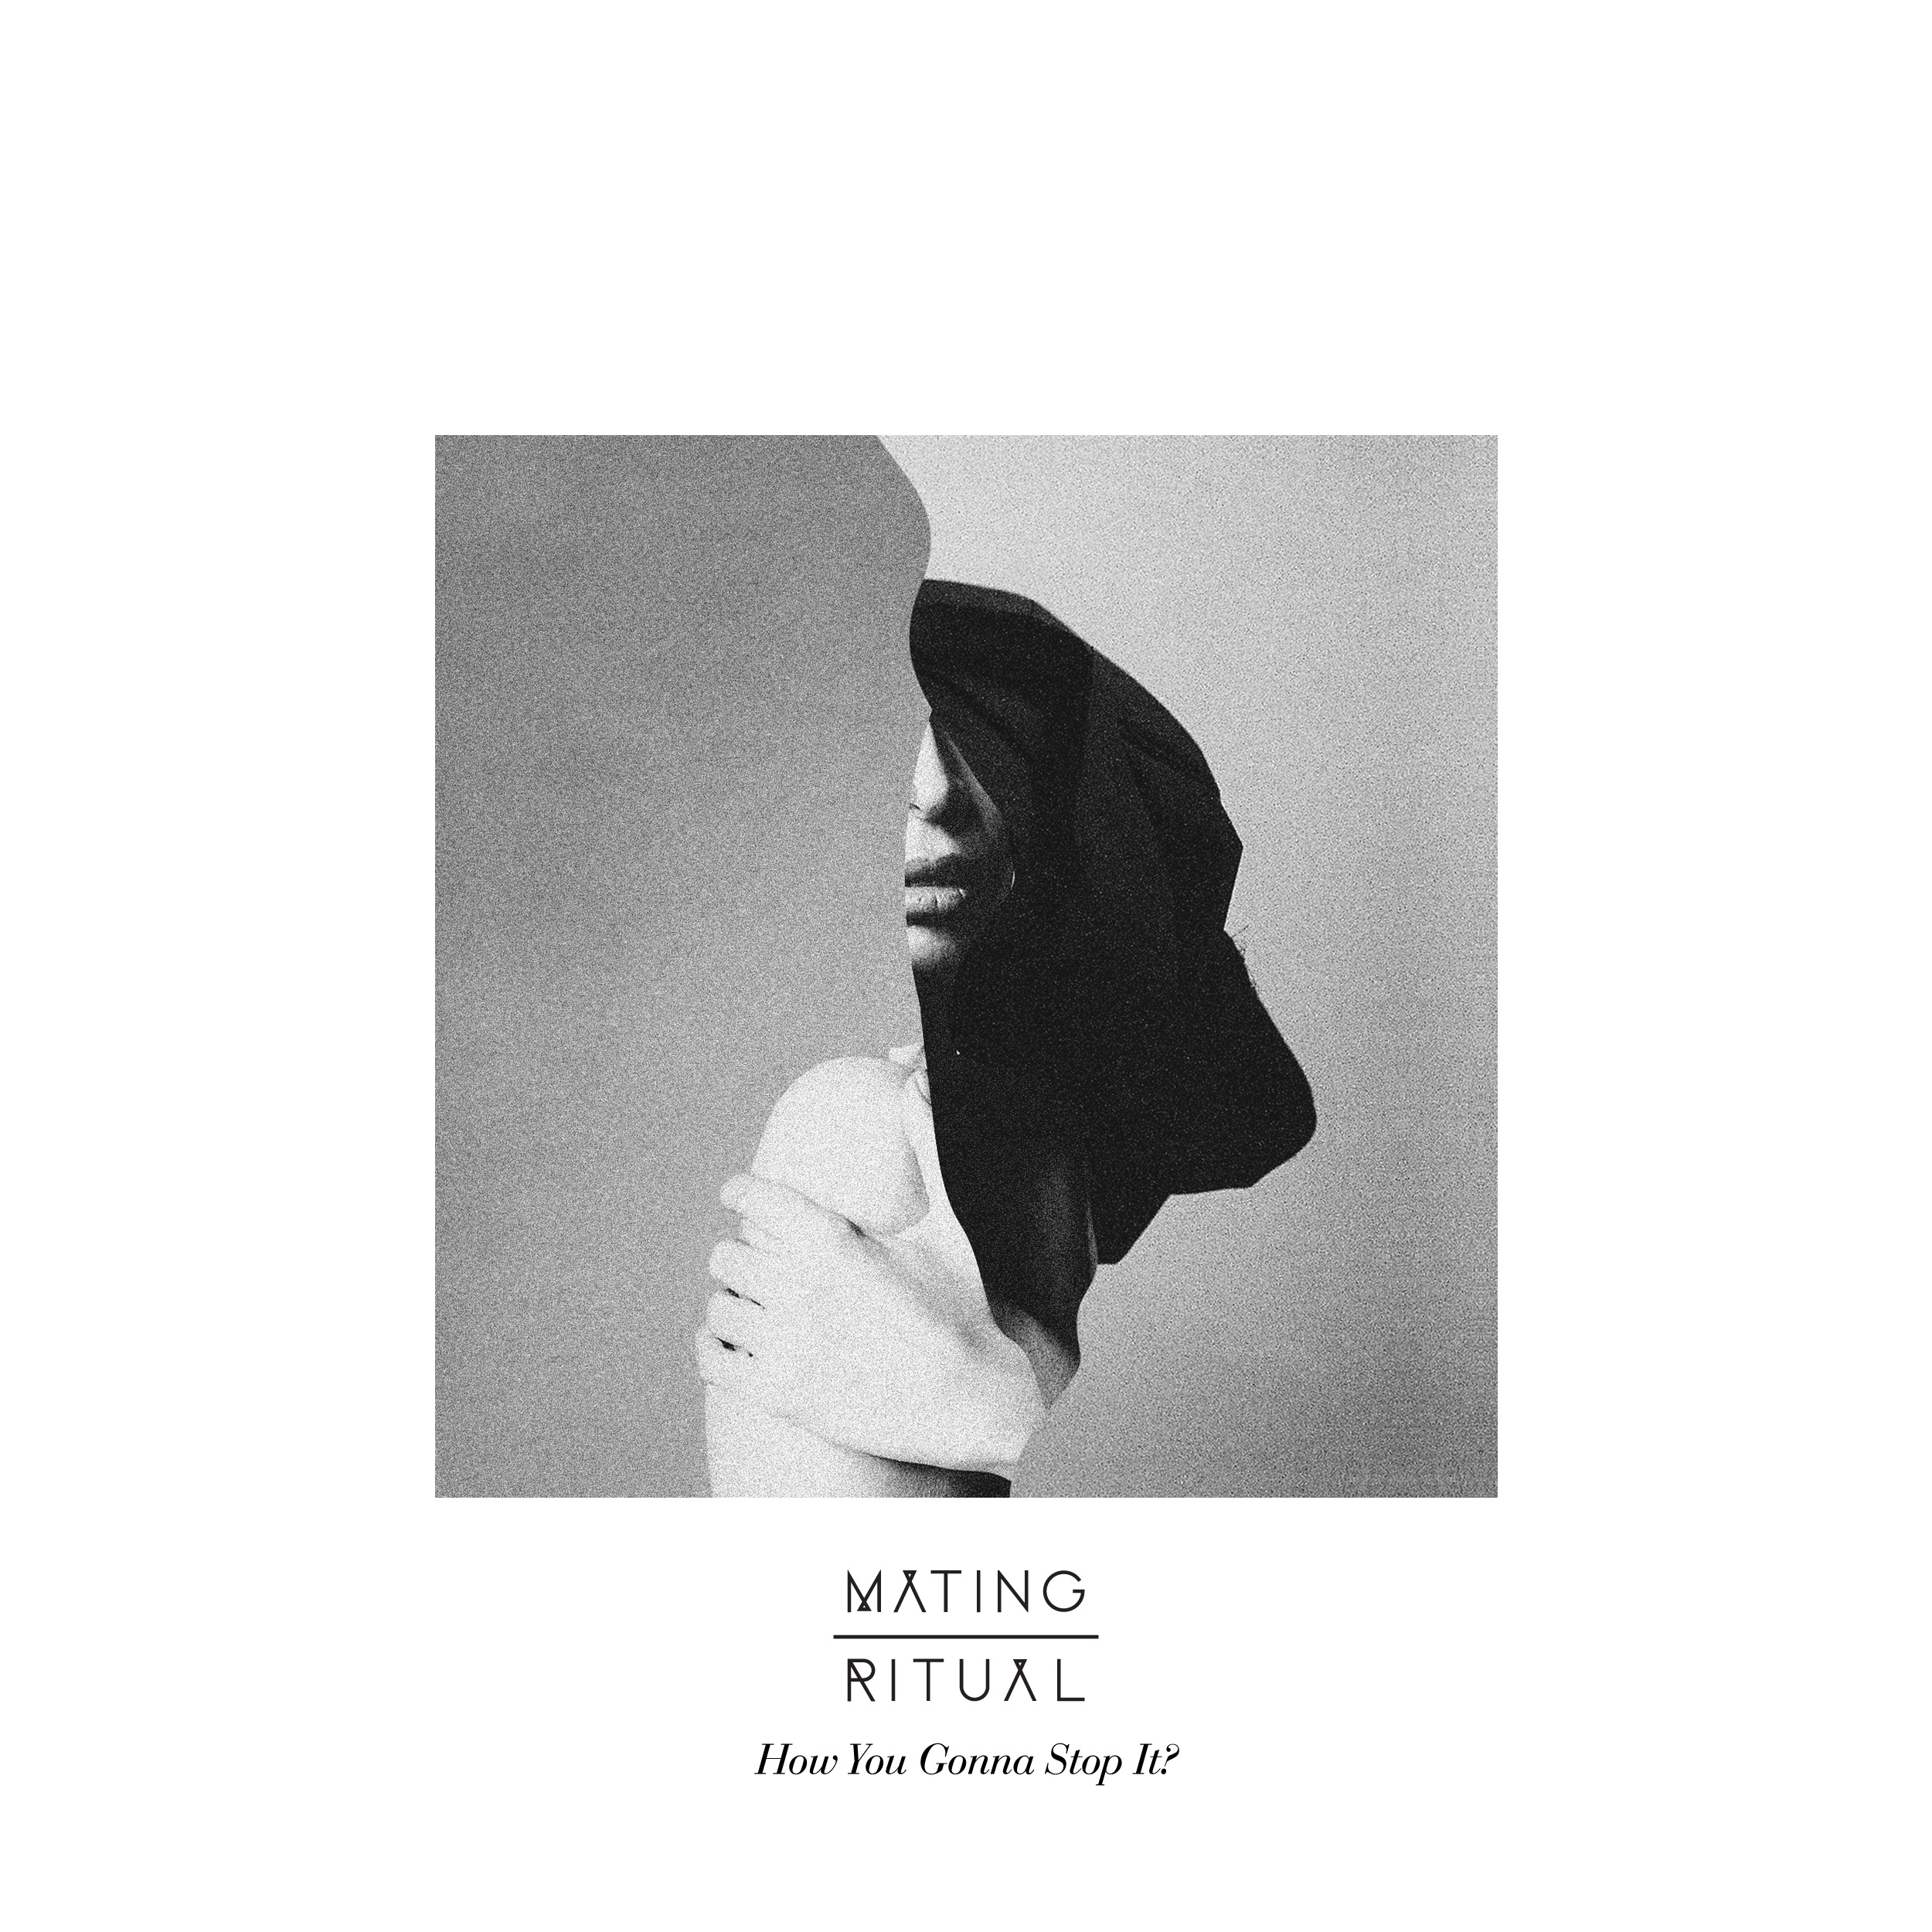 Mating Ritual – “How You Gonna Stop It”